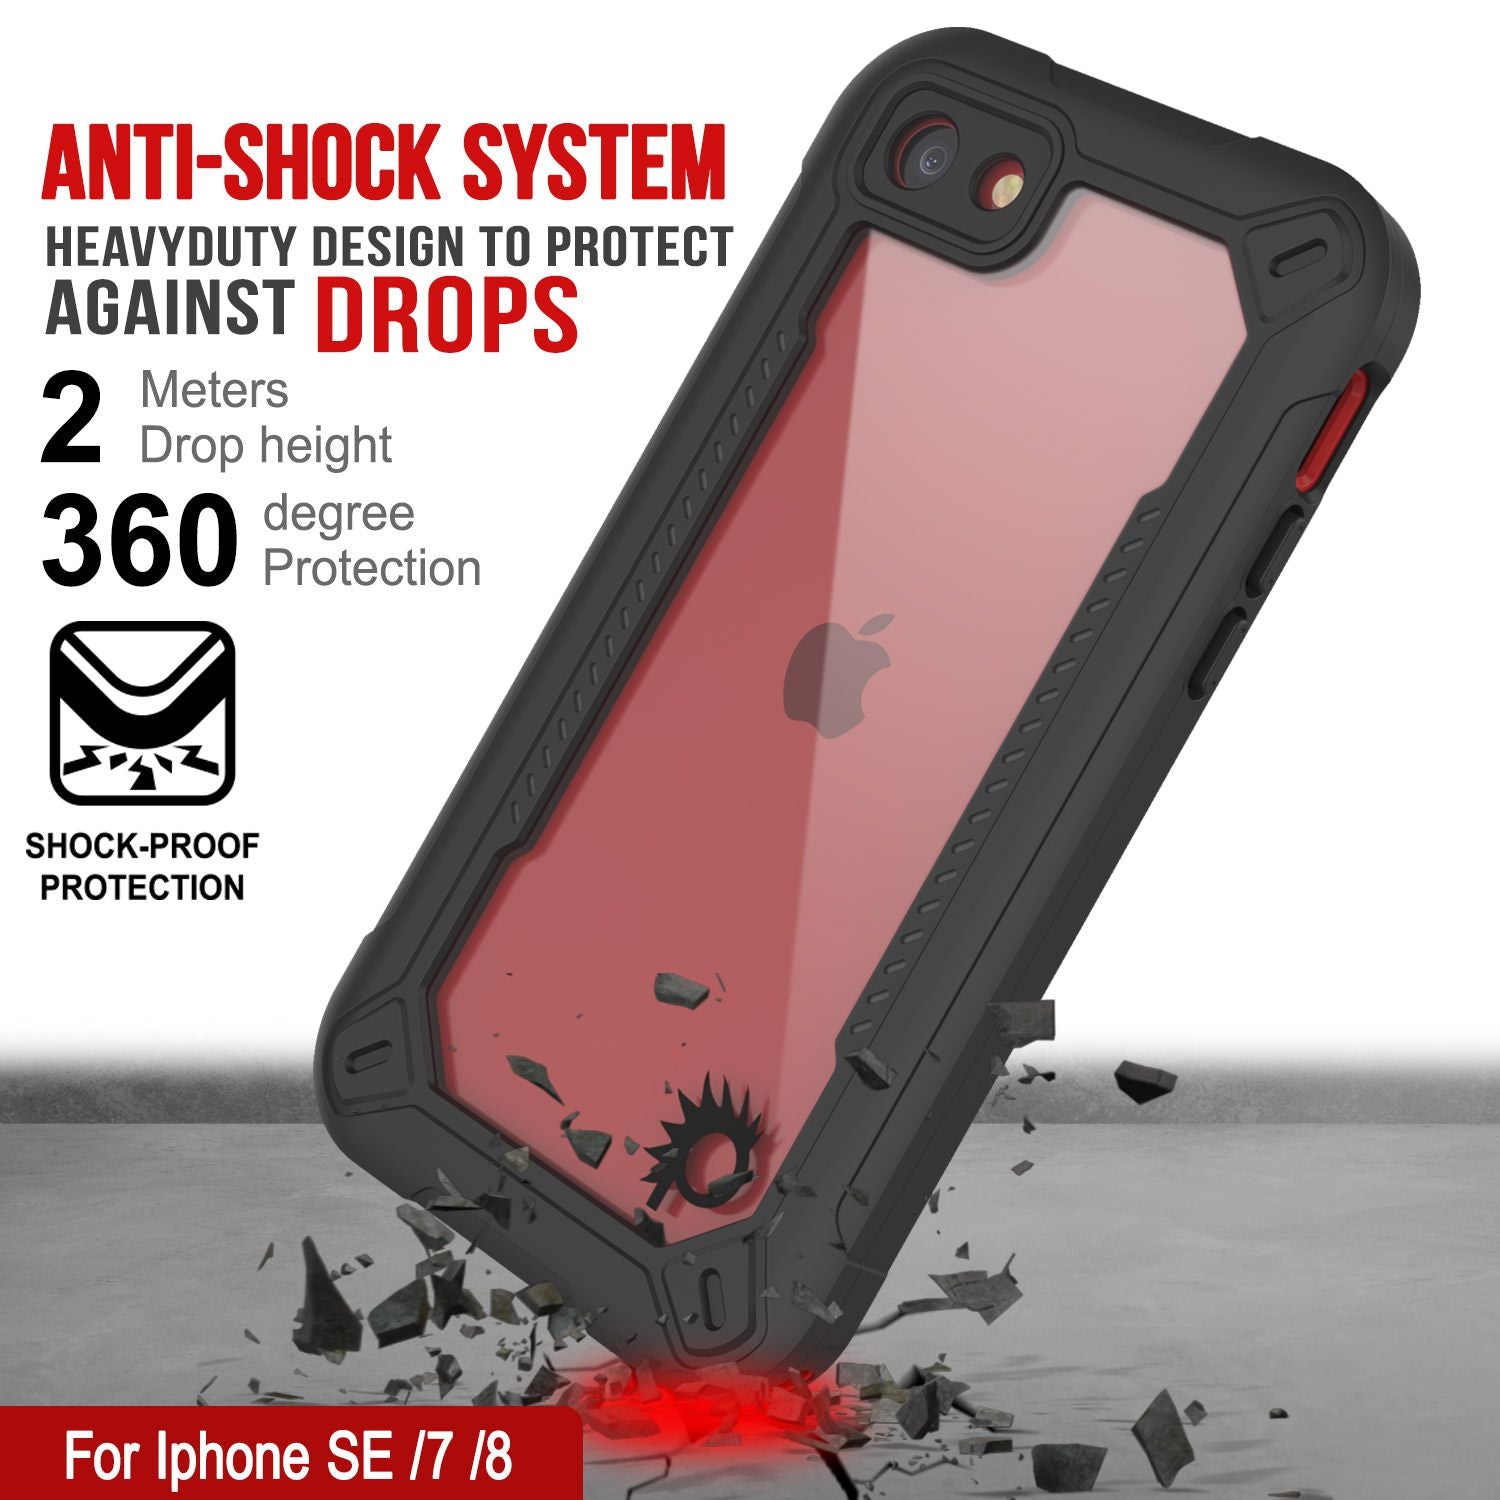 iPhone SE (4.7") Waterproof IP68 Case, Punkcase [red]  [Maximus Series] [Slim Fit] [IP68 Certified] [Shockresistant] Clear Armor Cover with Screen Protector | Ultimate Protection